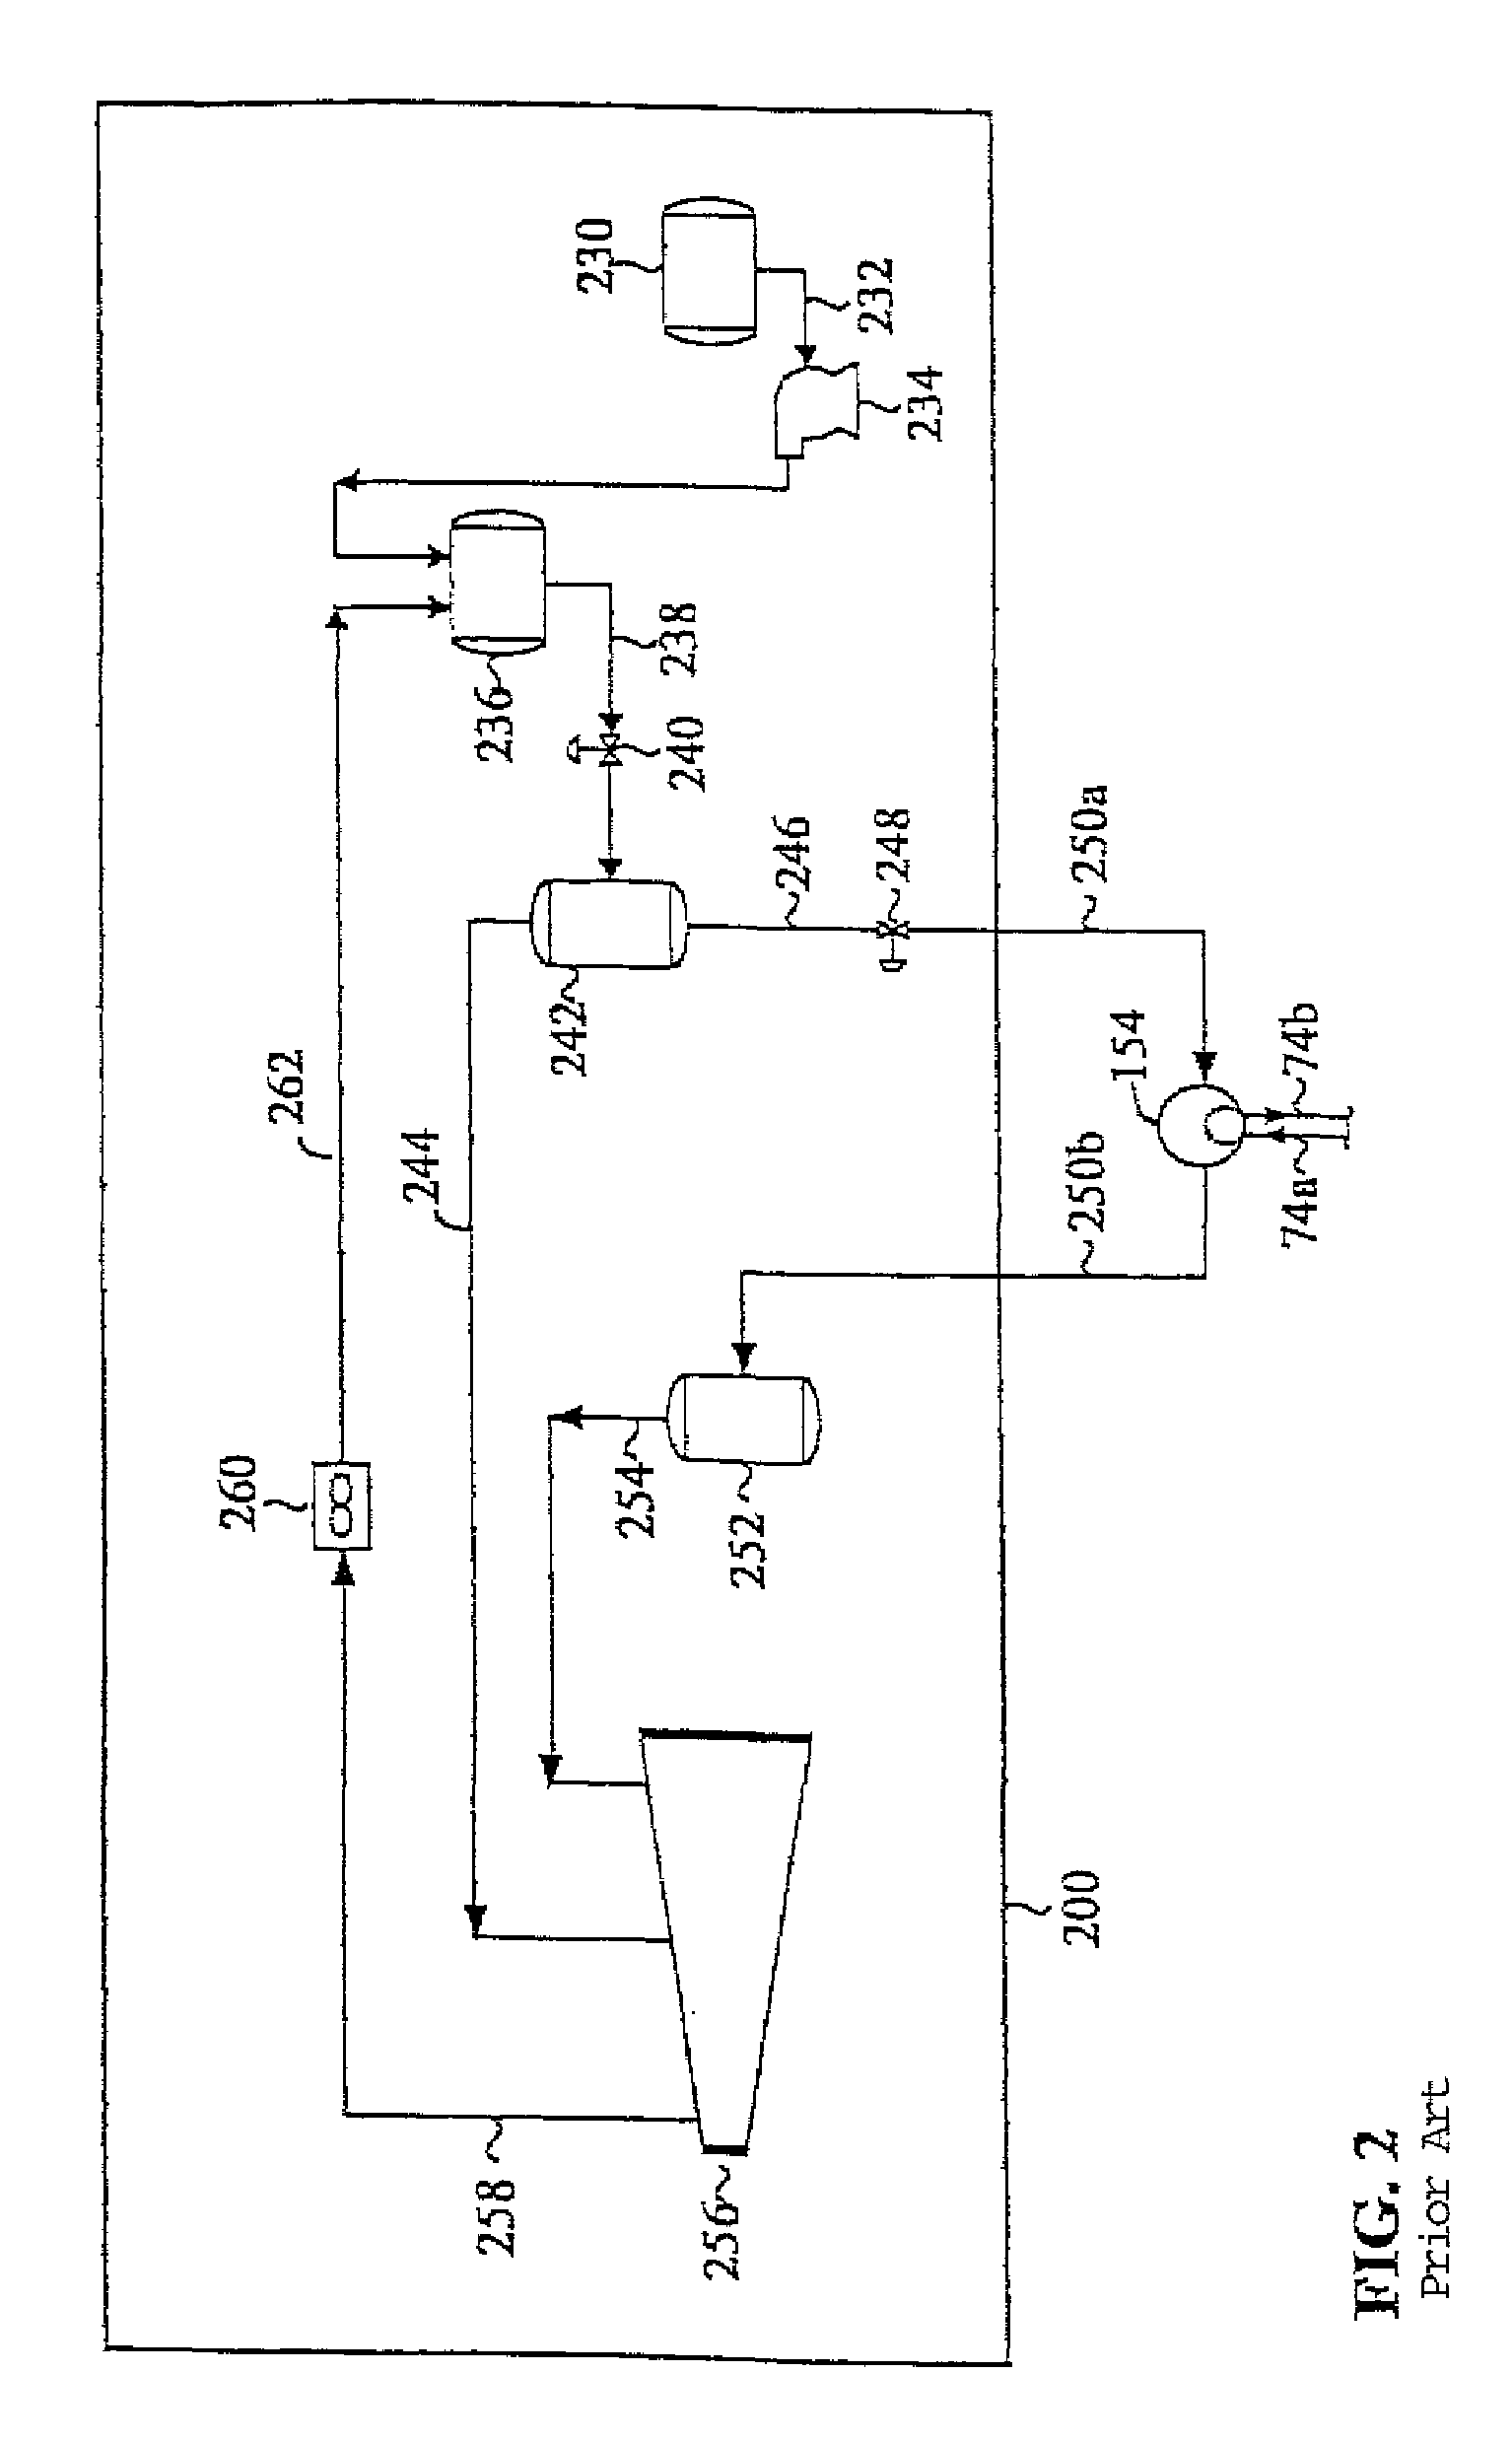 Internal refrigeration for enhanced NGL recovery